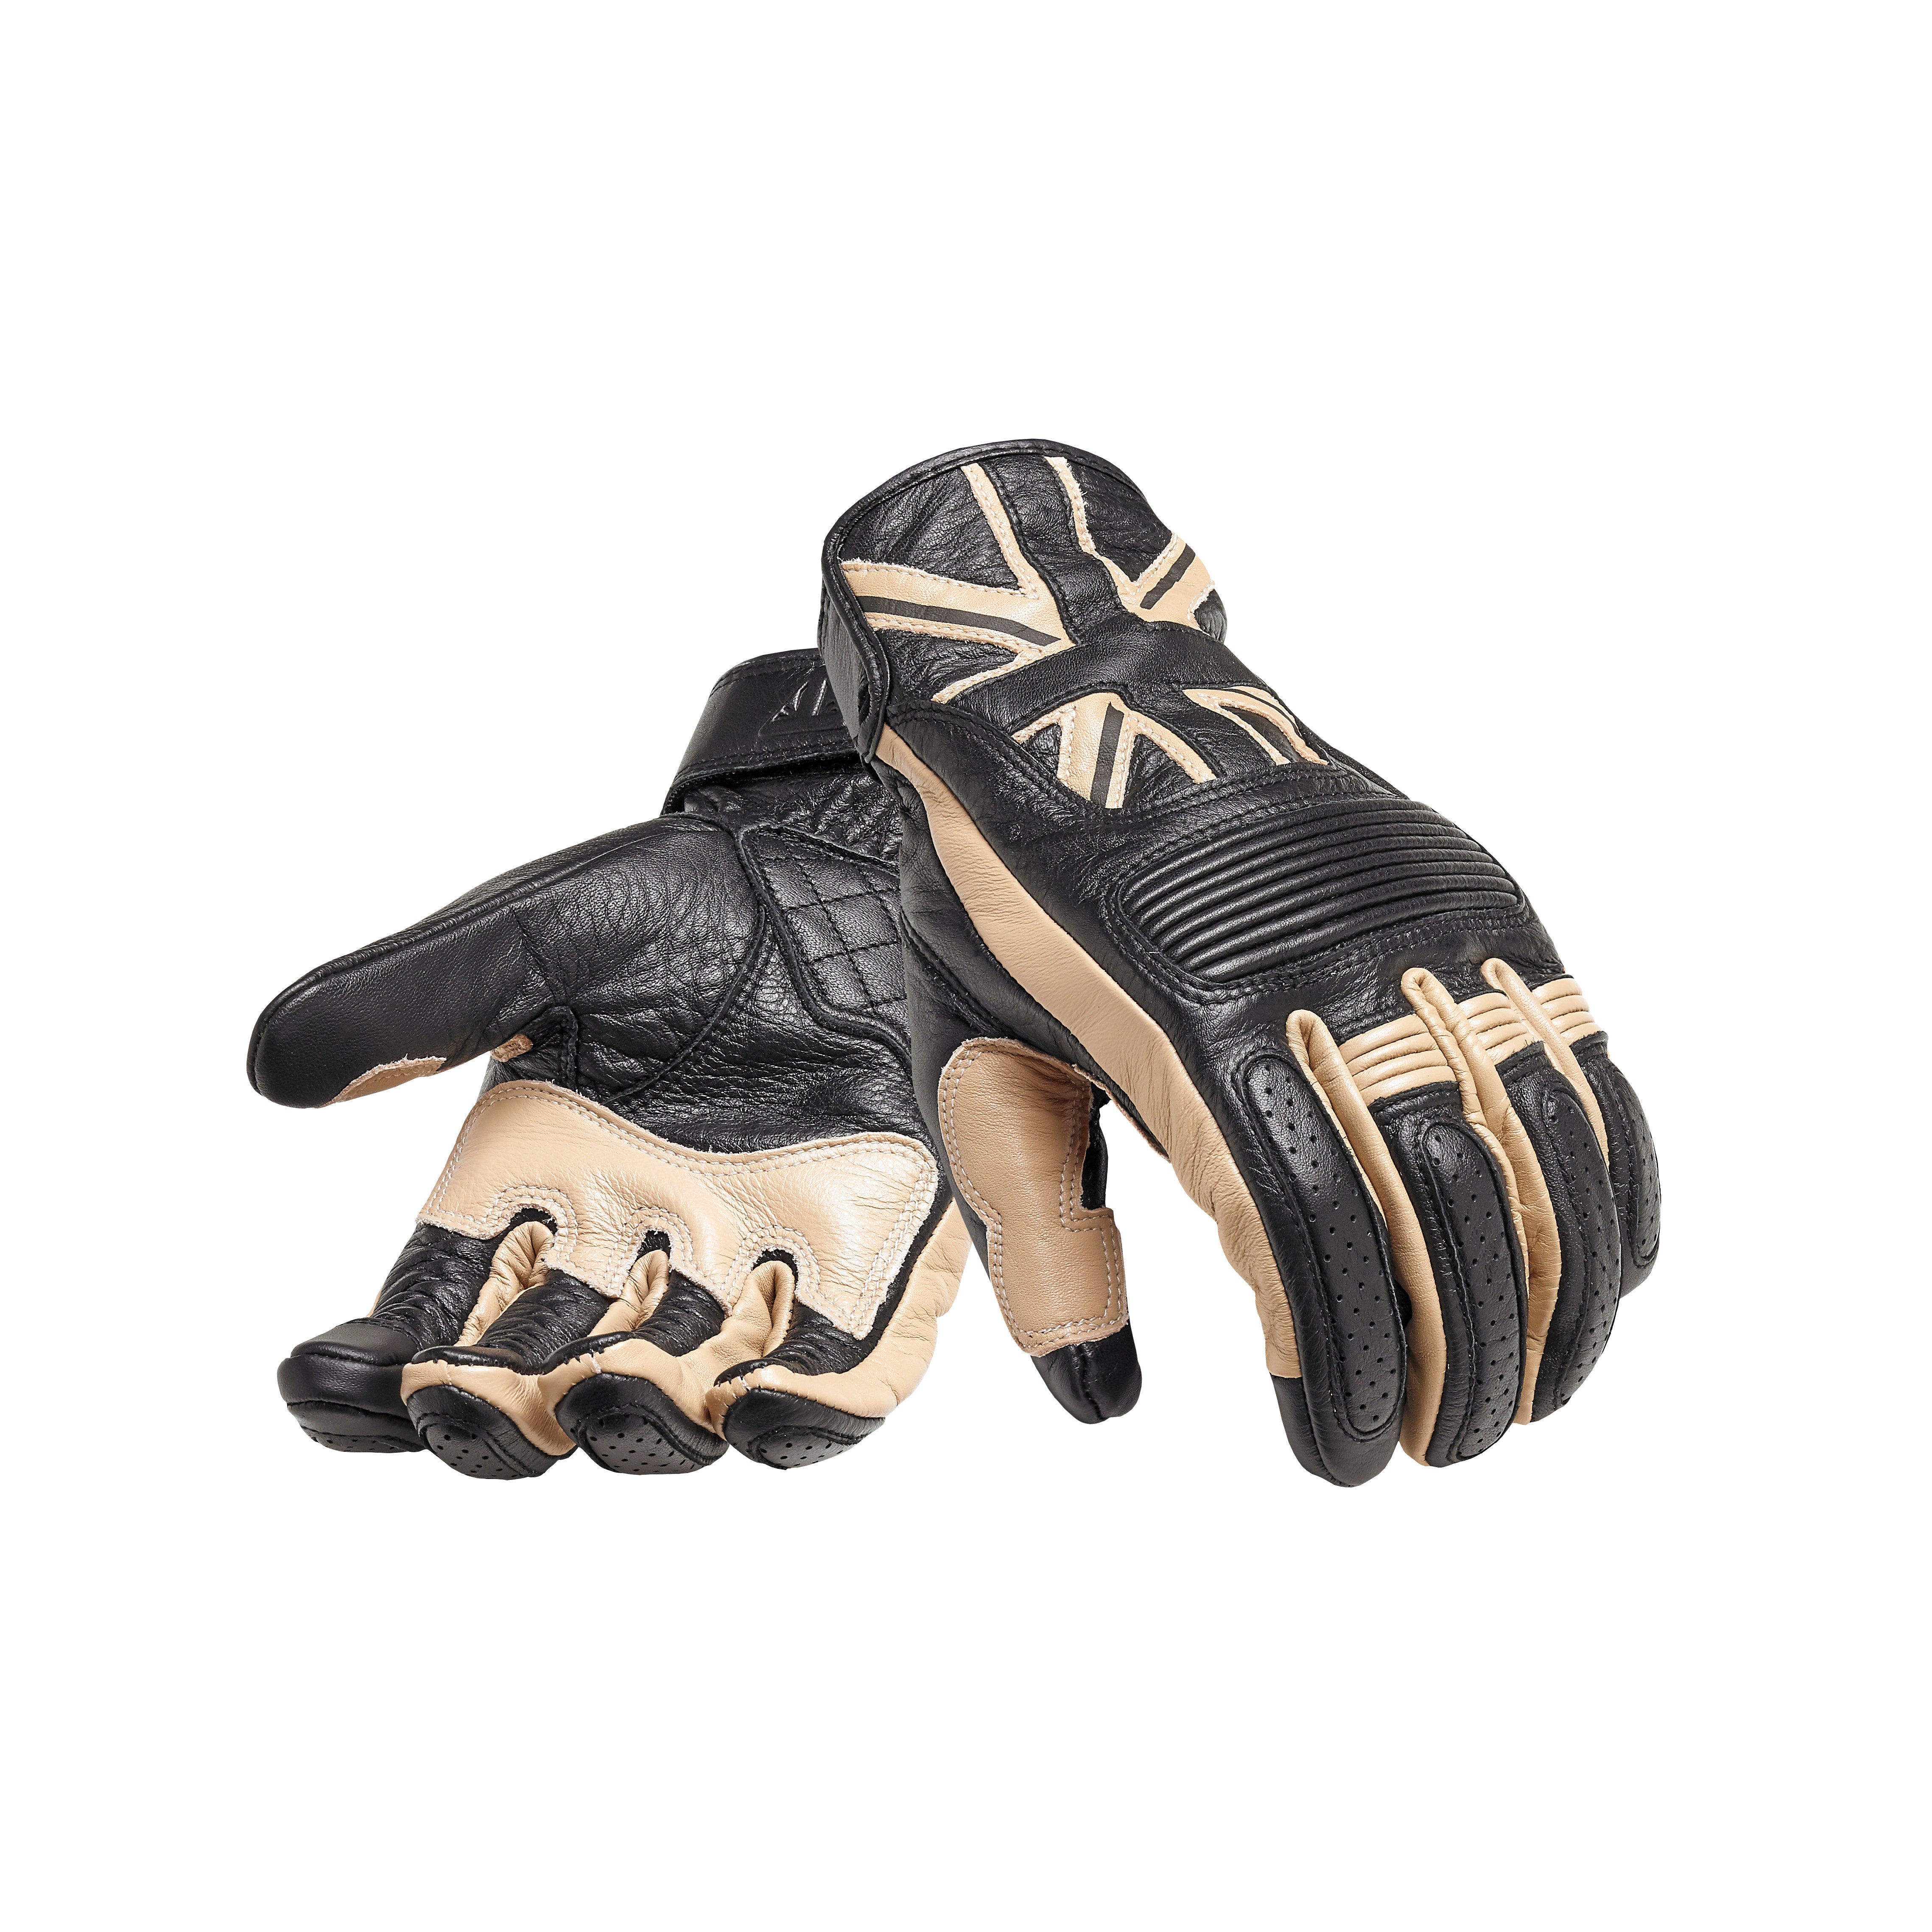 Triumph Mono Flag Leather Motorcycle Gloves